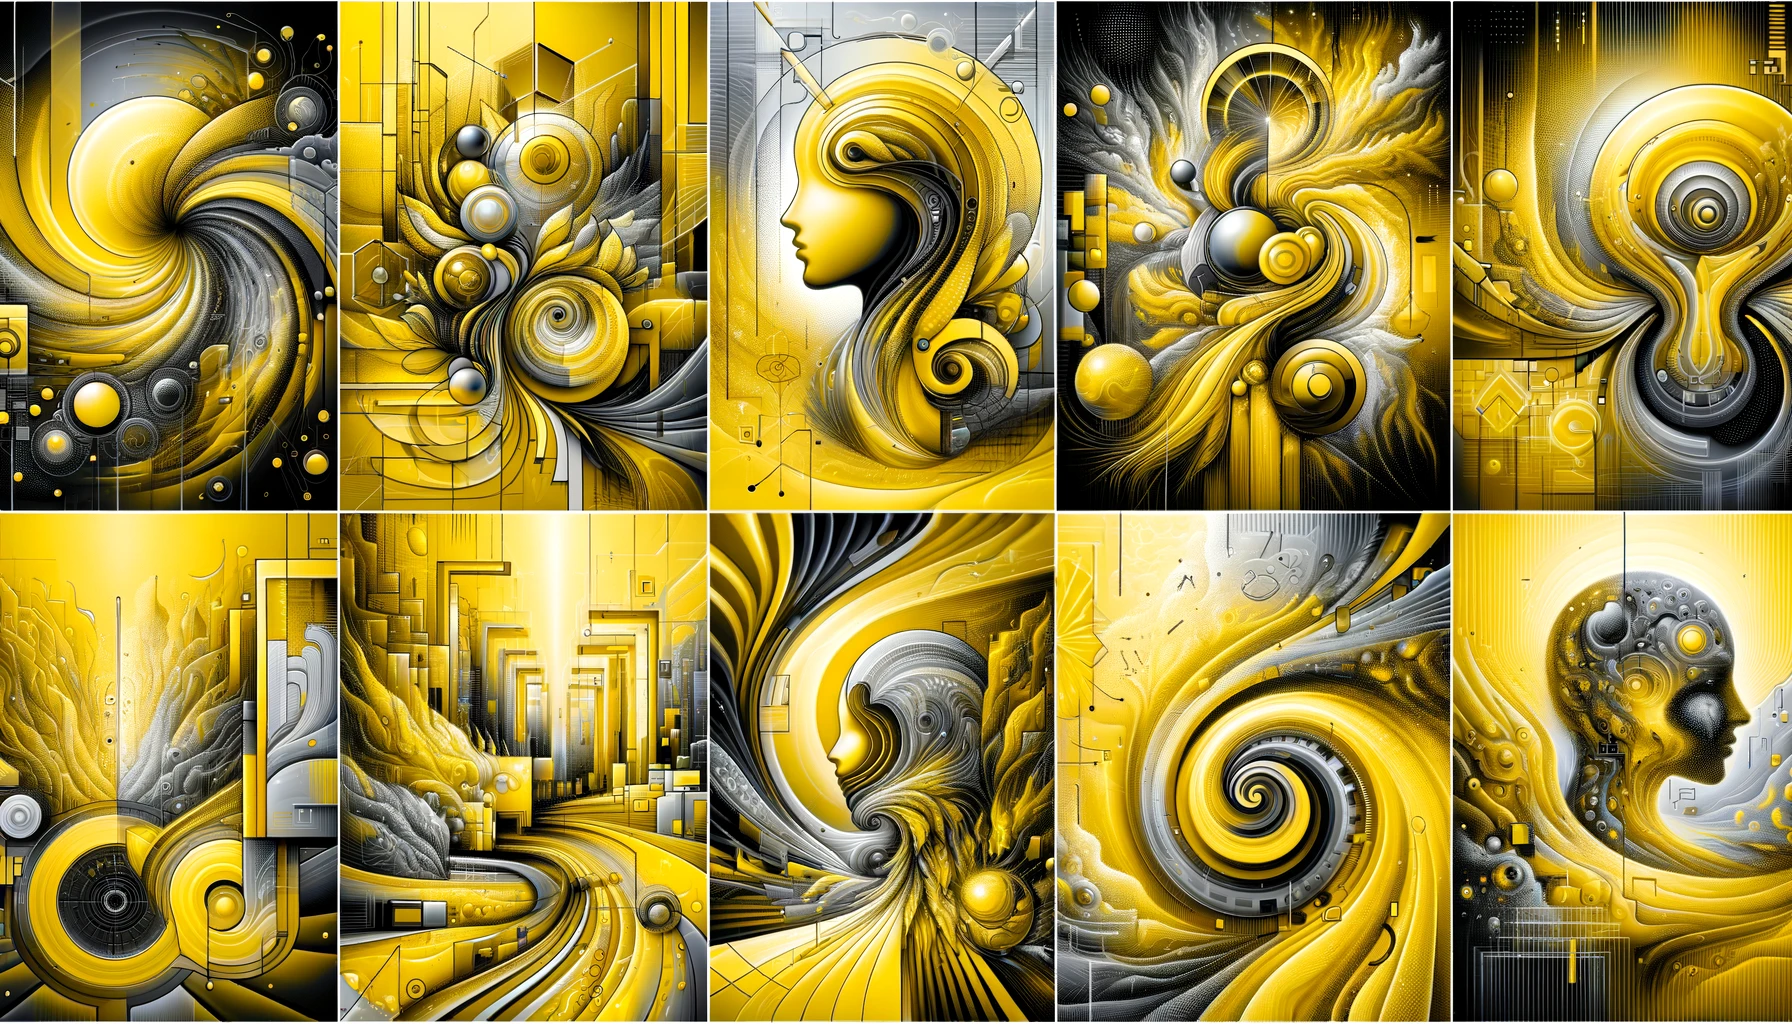 DALL-E-2024-01-19-23.03.15---A-series-of-hyper-stylized-artistic-representations--each-featuring-a-dominant-yellow-color-theme-and-blending-abstract-art-with-futuristic-concepts.-